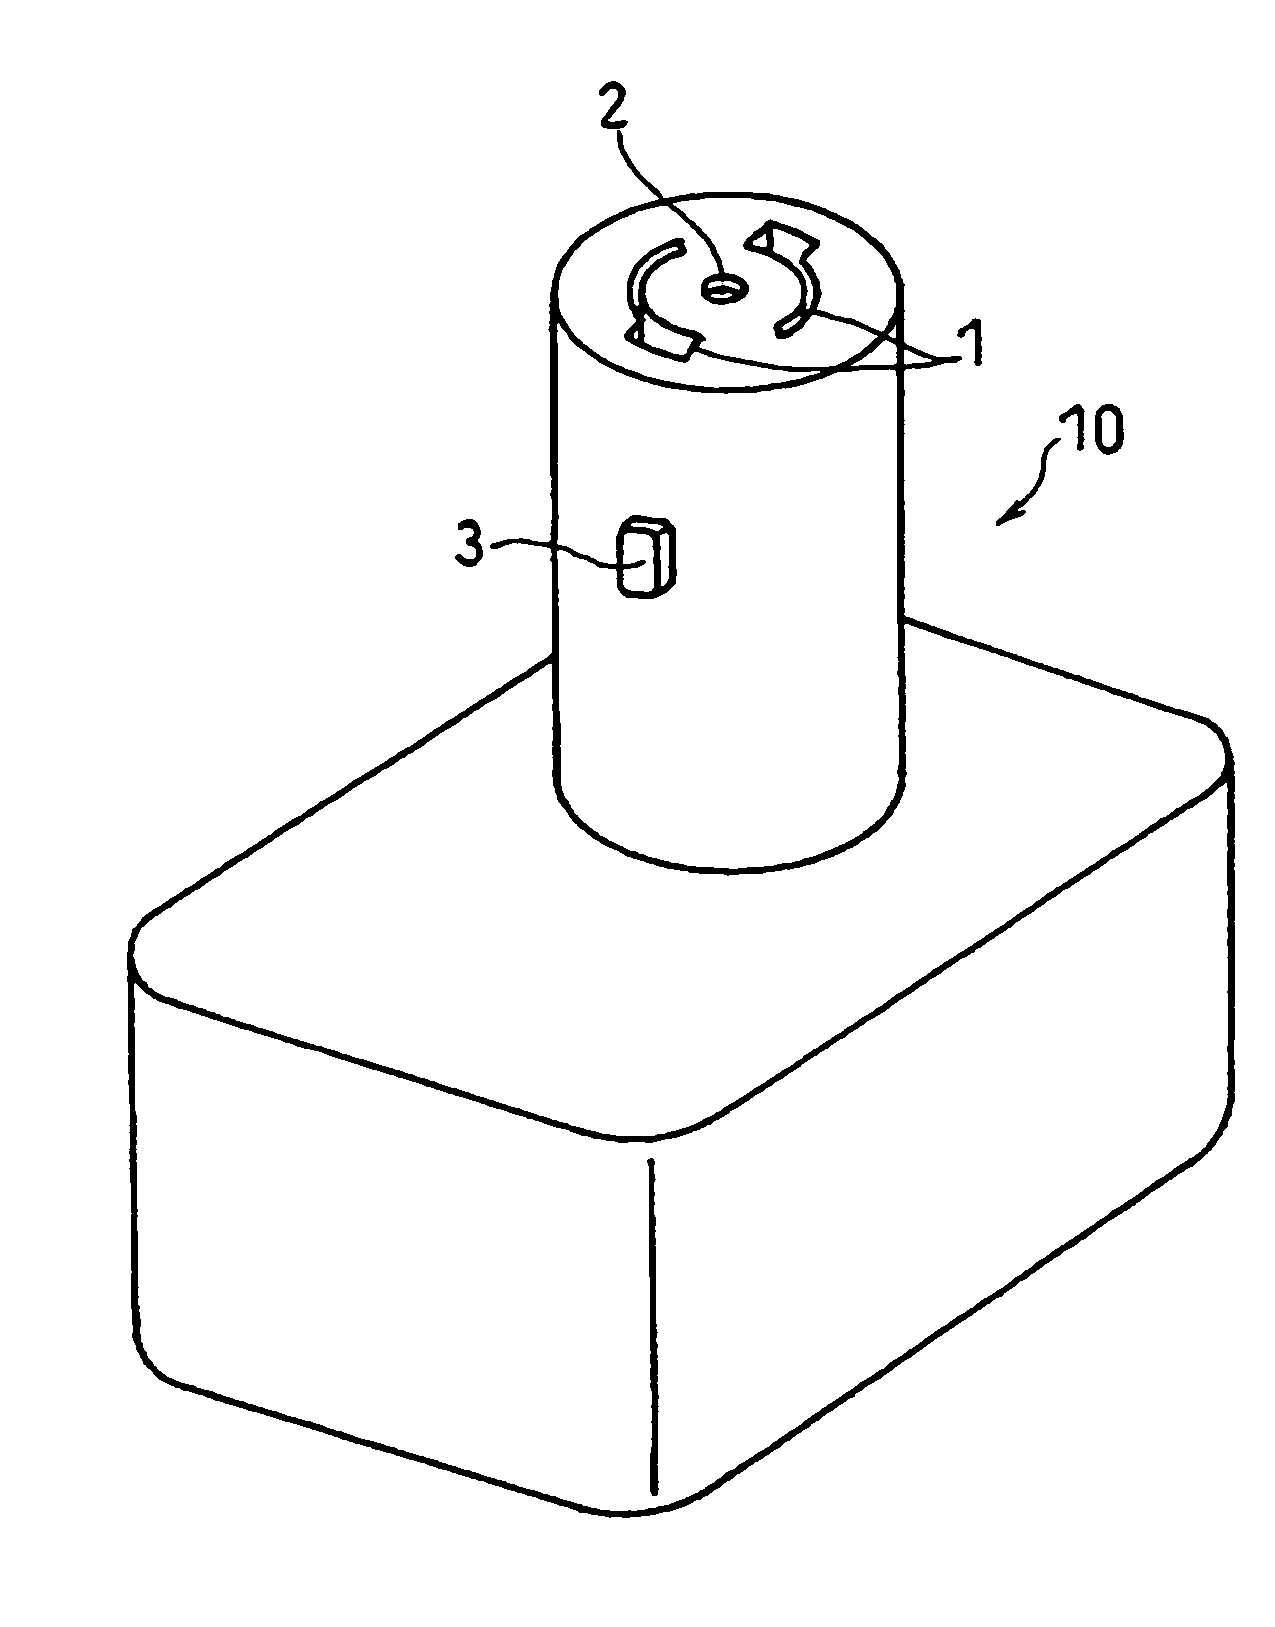 Portable power source and portable power source system